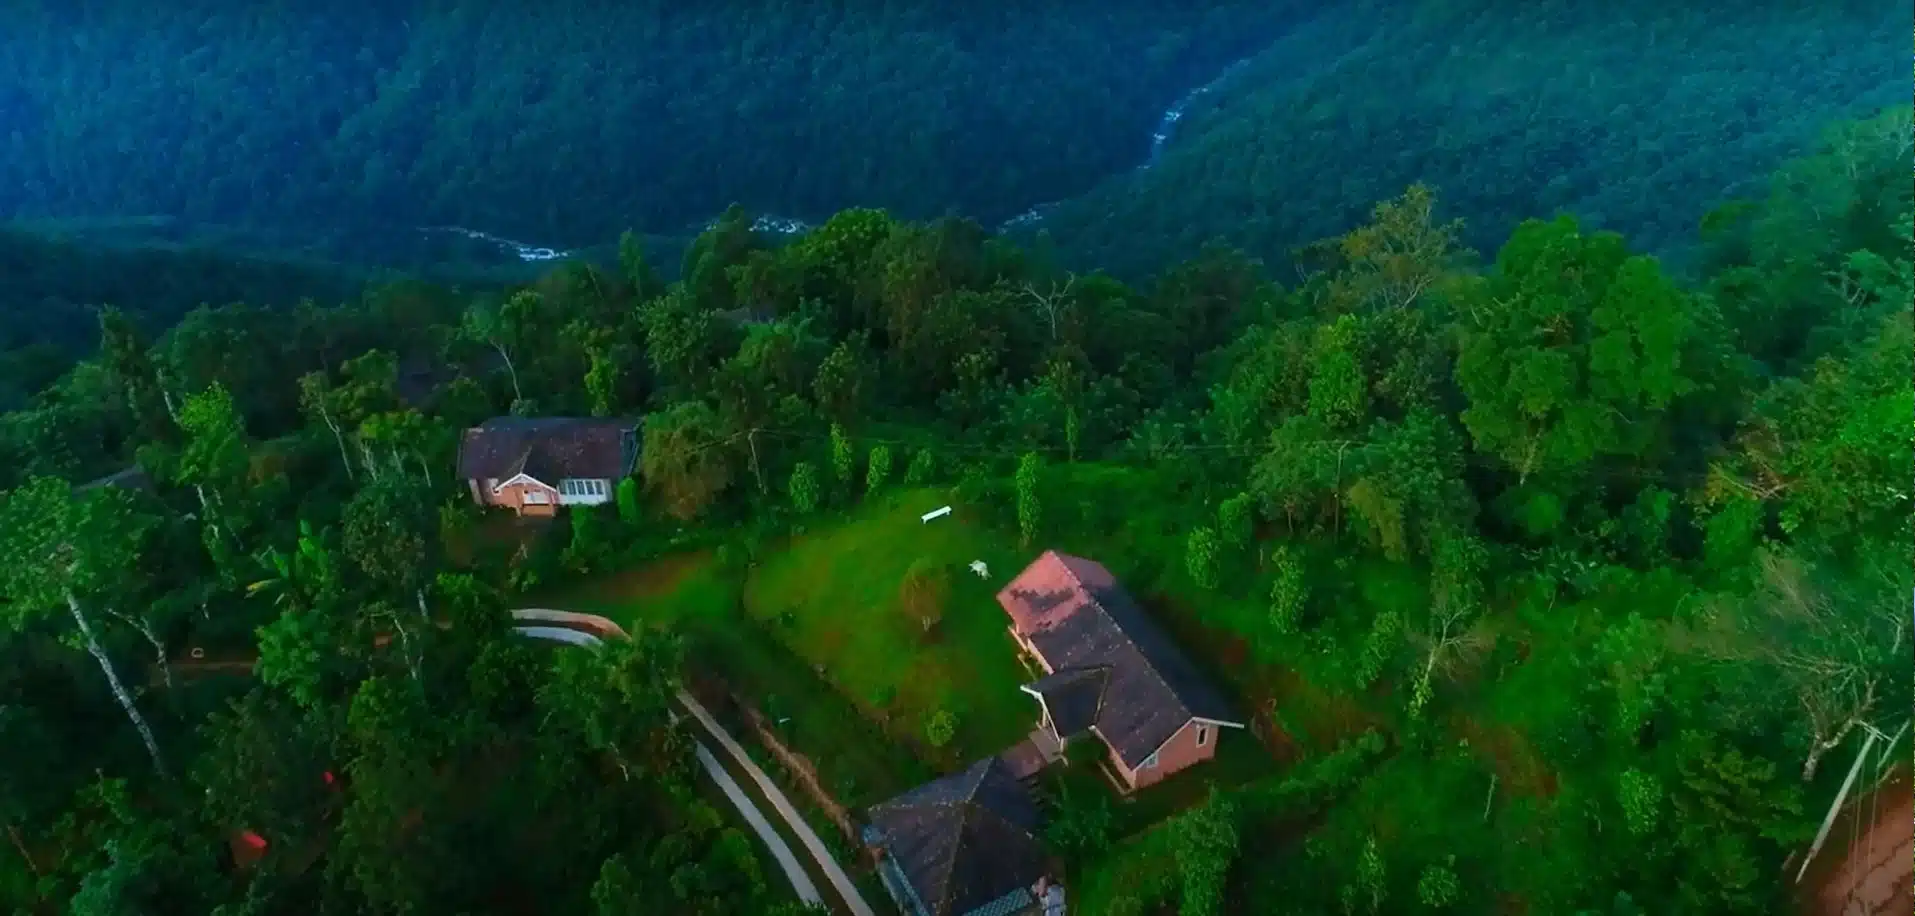 After the rains - A luxury resort in wayanad